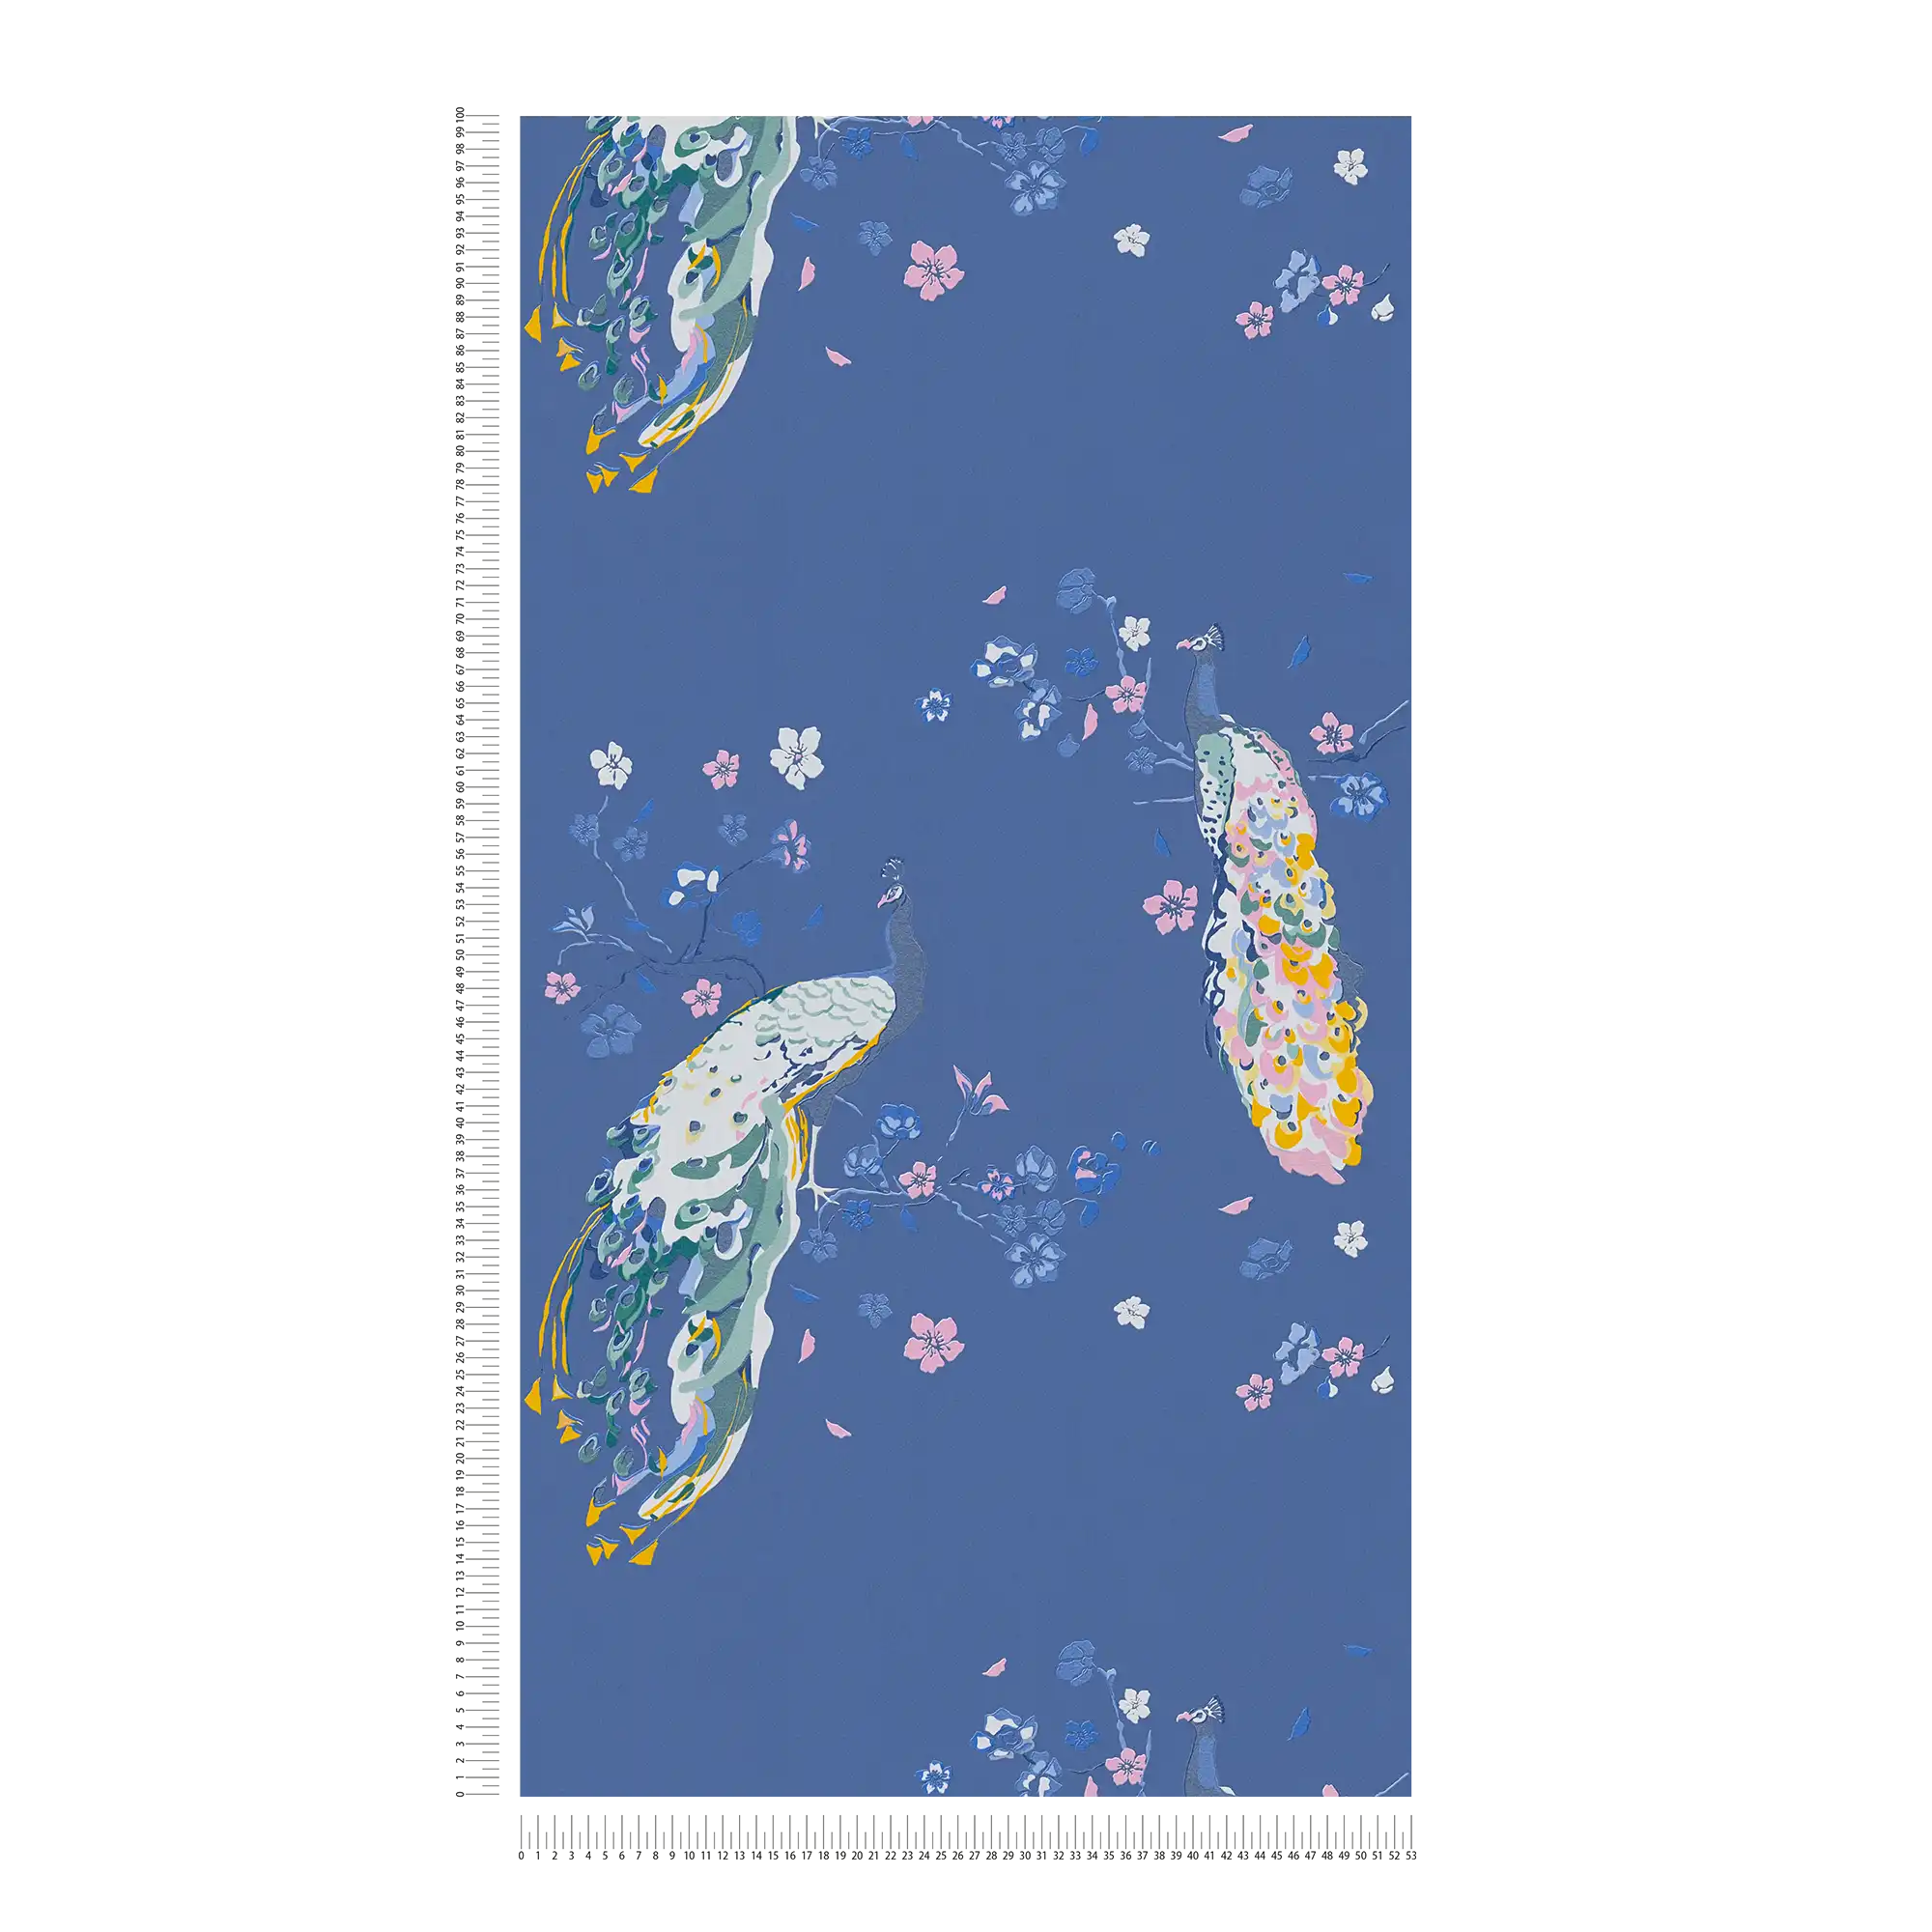             Non-woven wallpaper with peacock pattern and glossy effect - blue, pink, colourful
        